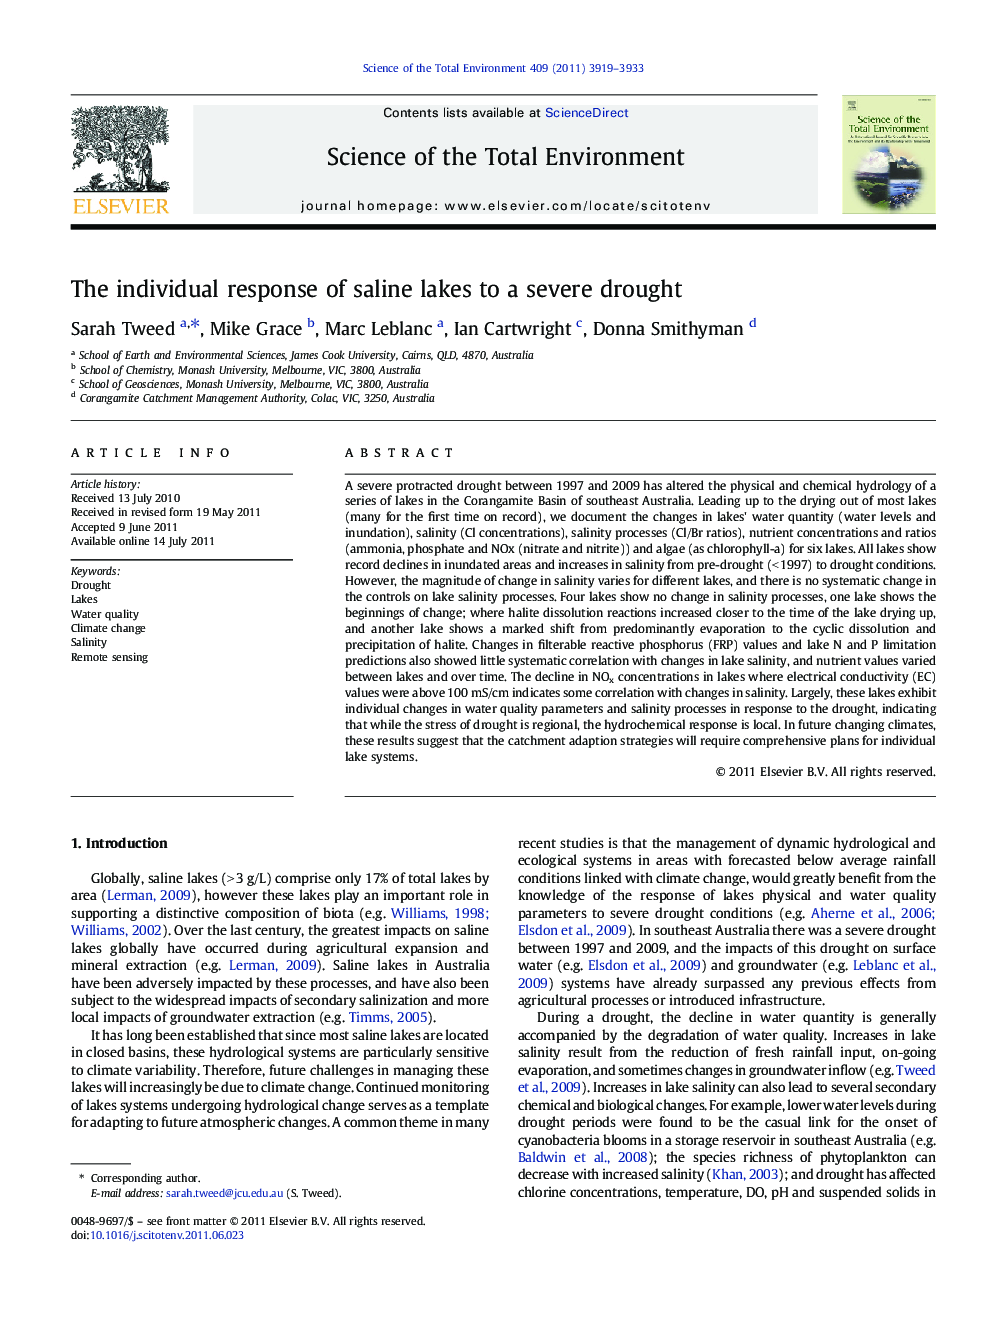 The individual response of saline lakes to a severe drought